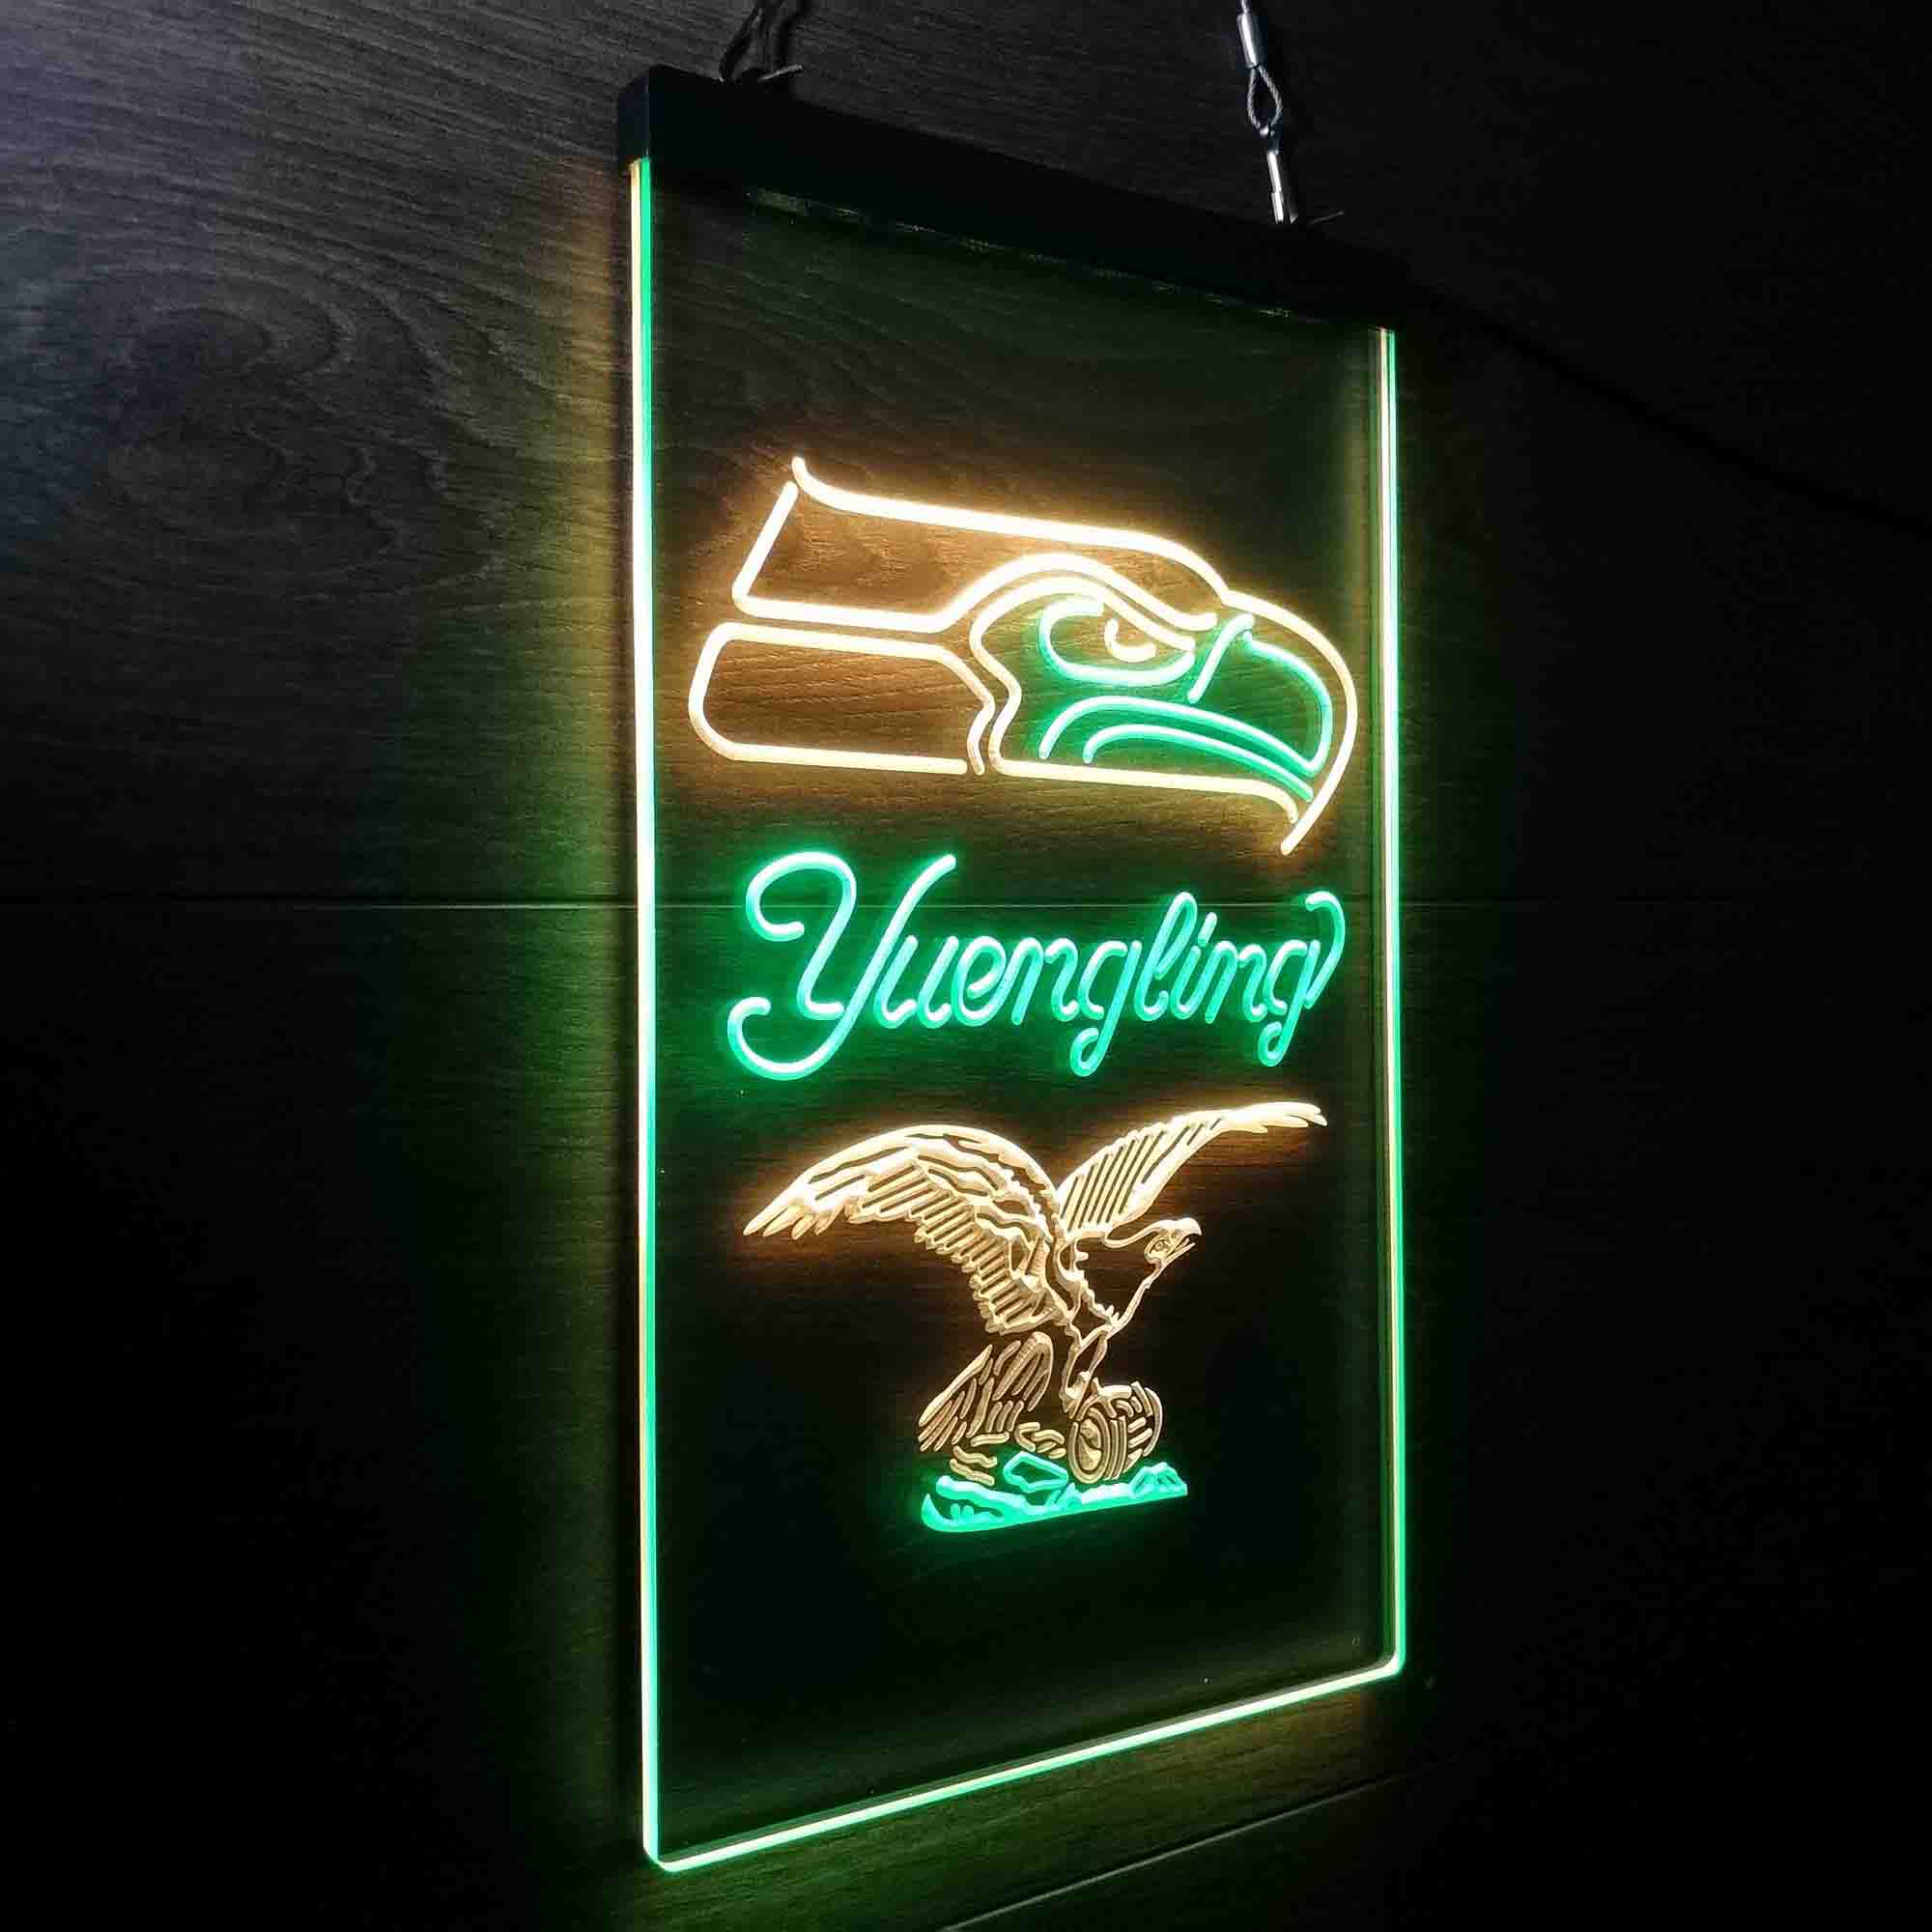 Yuengling Bar Seattle Seahawks Est. 1976 LED Neon Sign